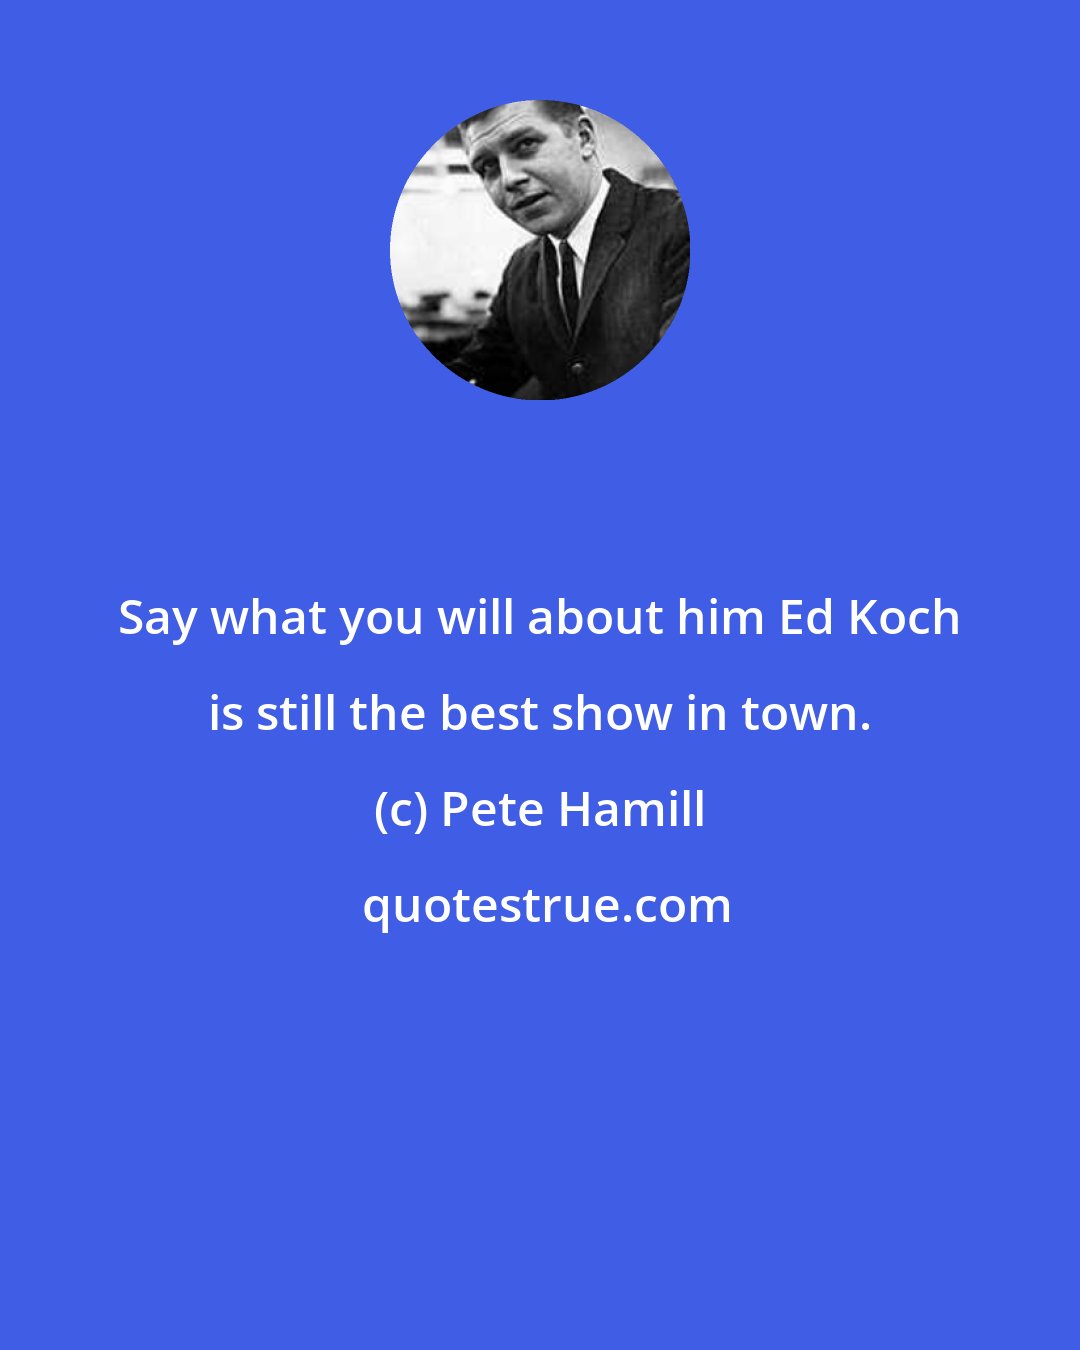 Pete Hamill: Say what you will about him Ed Koch is still the best show in town.